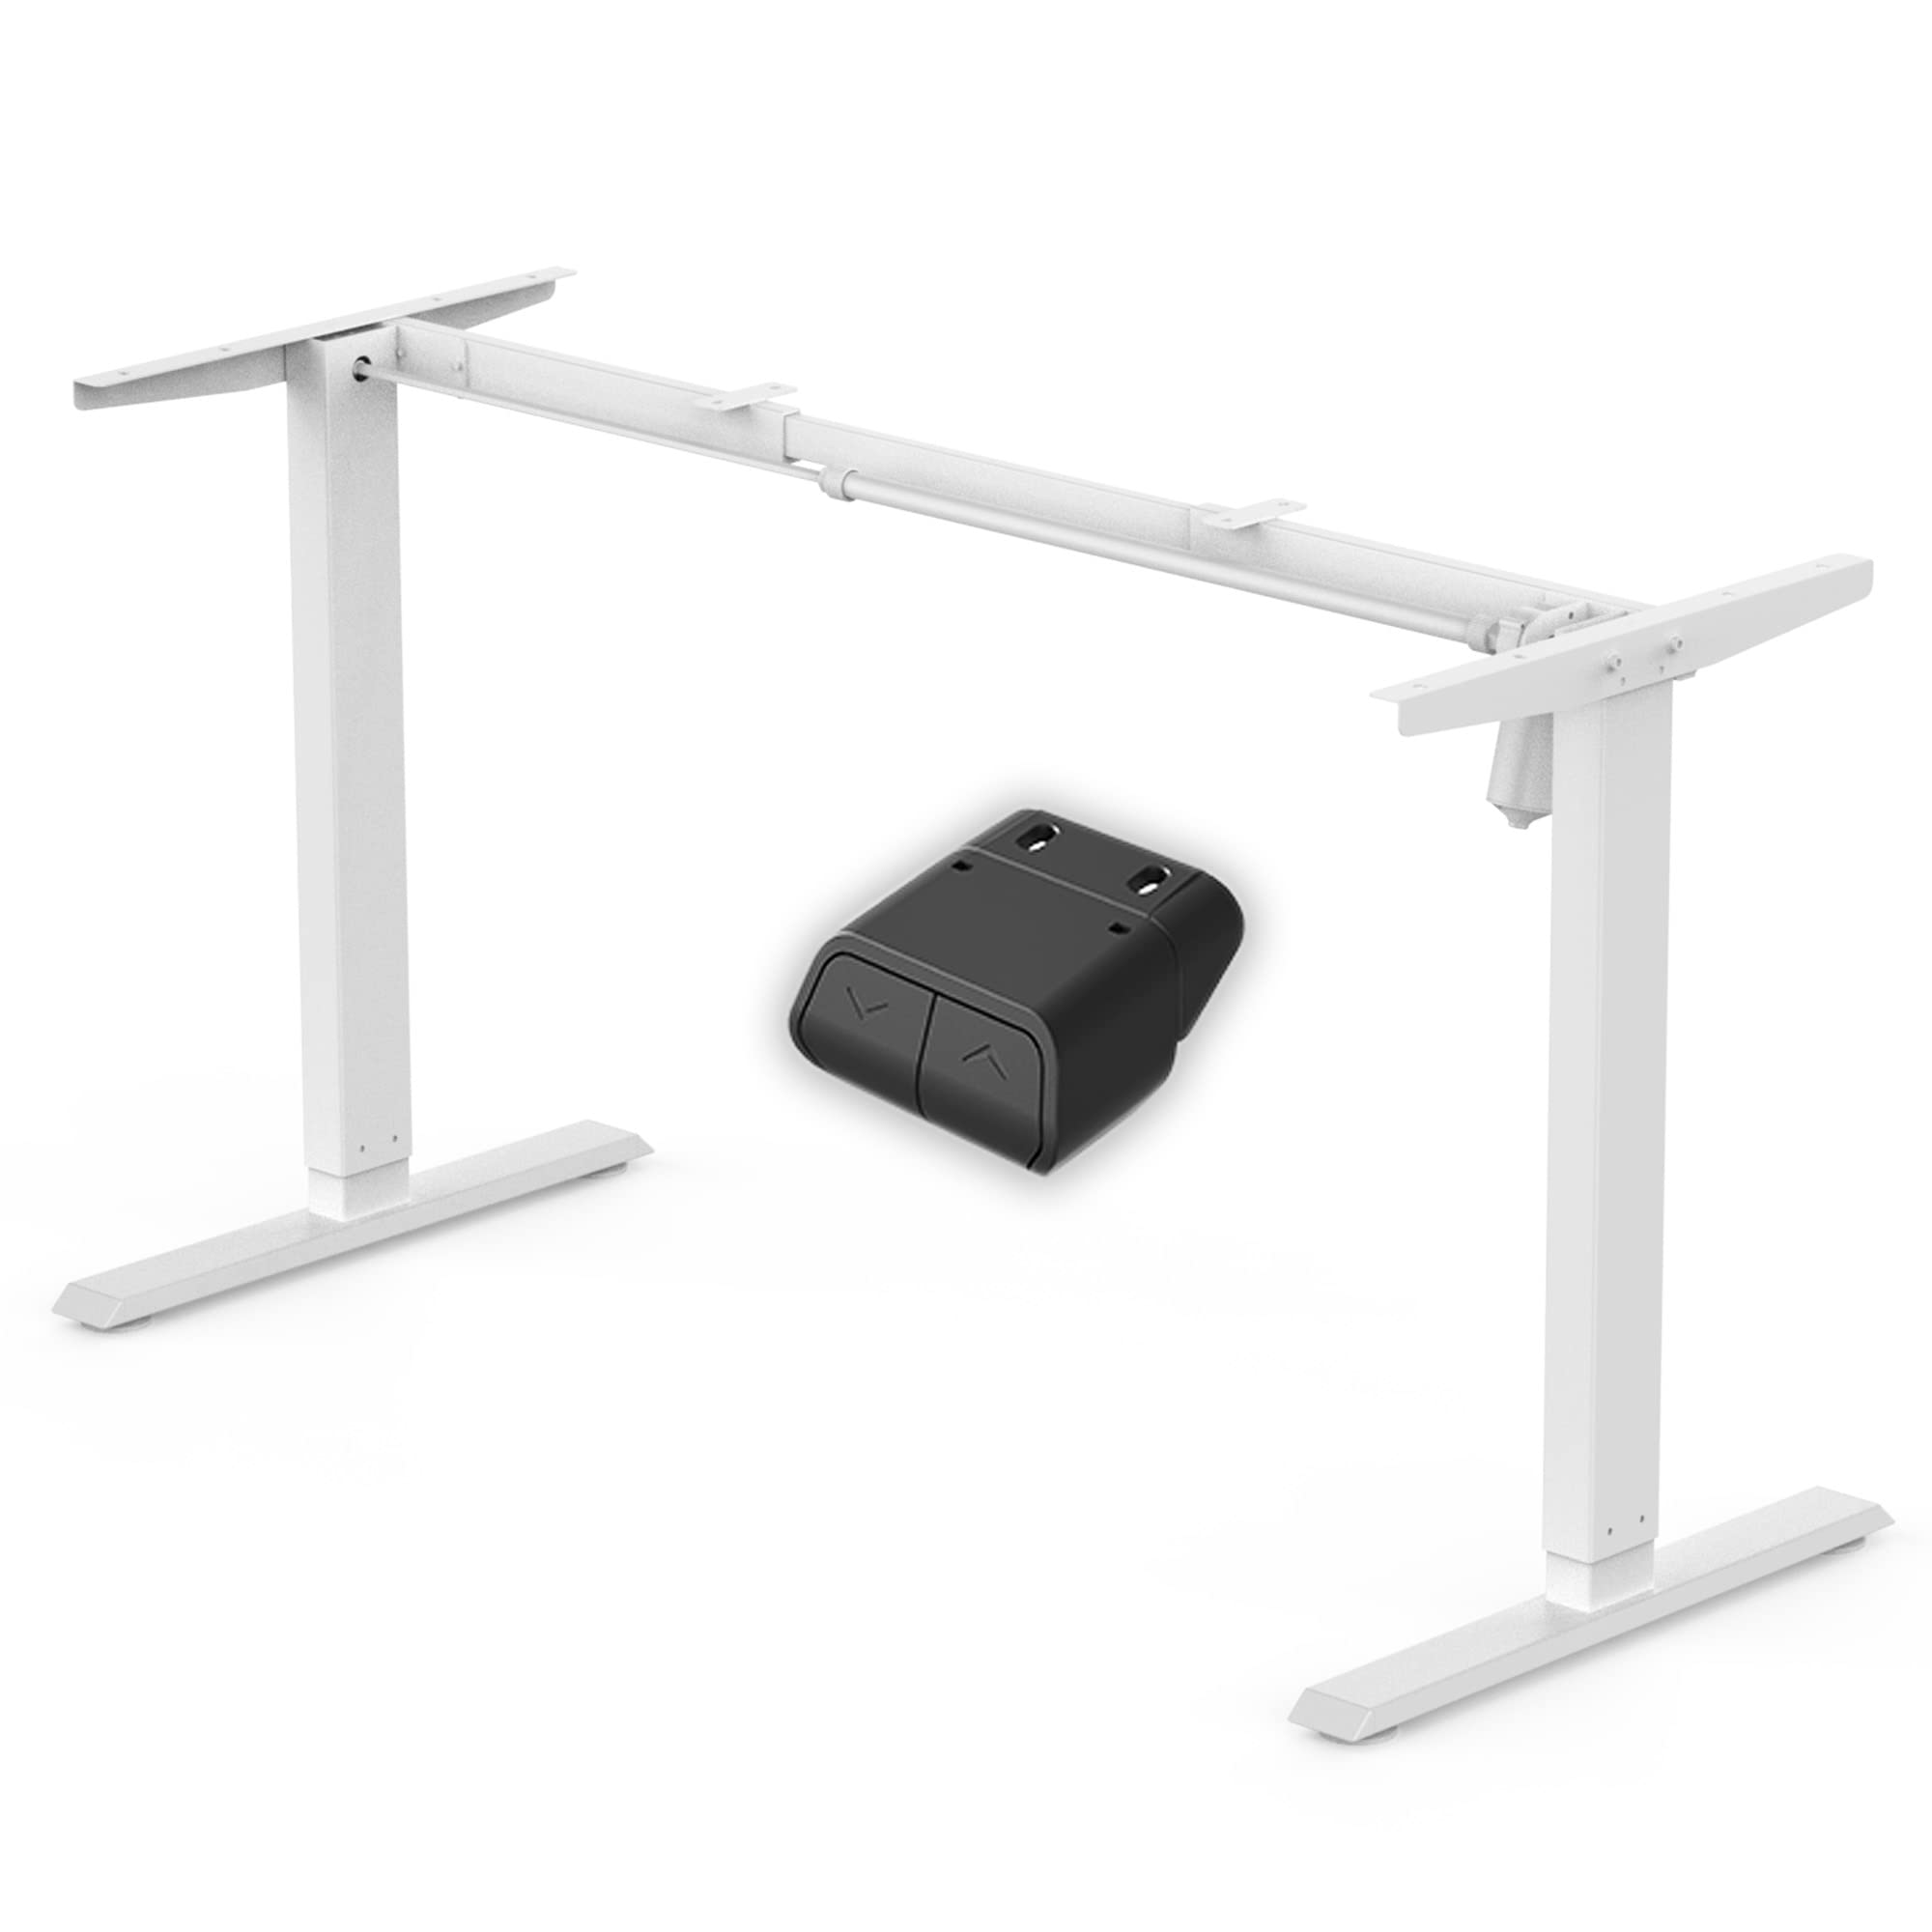 FEZIBO Single Motor Height Adjustable Standing Desk Frame, Electric Standing Desk Legs for 36 inches to 59 Inches Desk Tops, Sturdy Stand up Desk Base for Workstation?White(Frame Only)